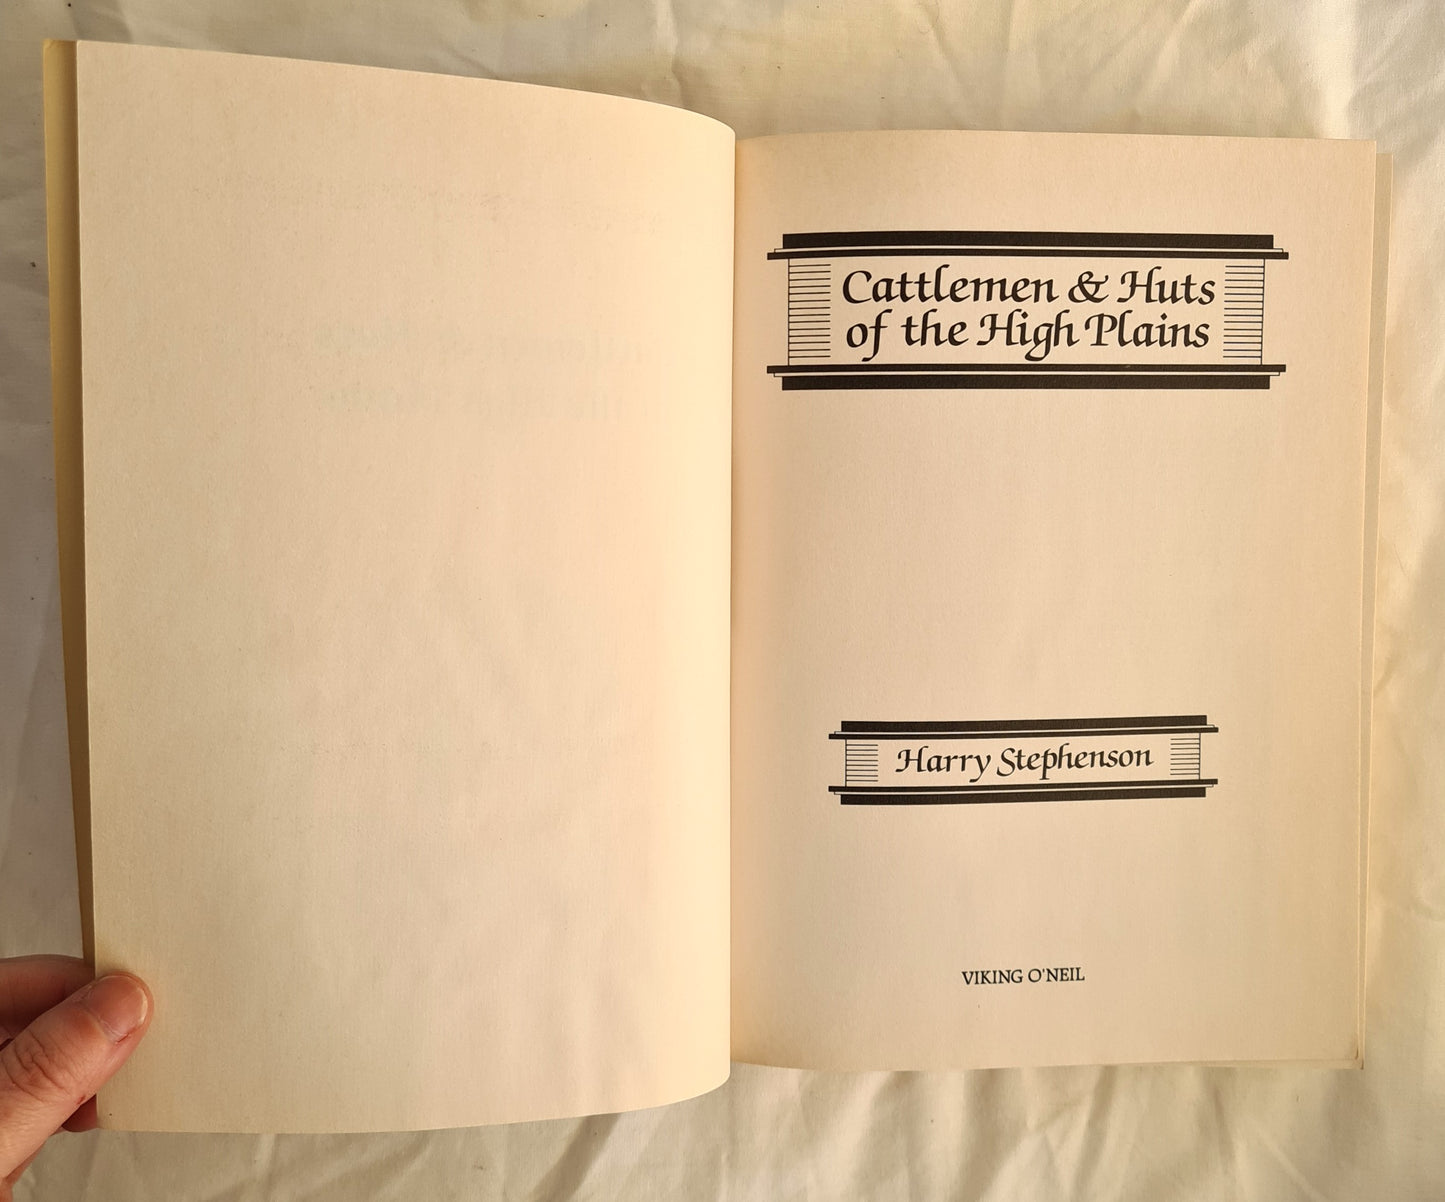 Cattlemen & Huts of the High Plains by Harry Stephenson